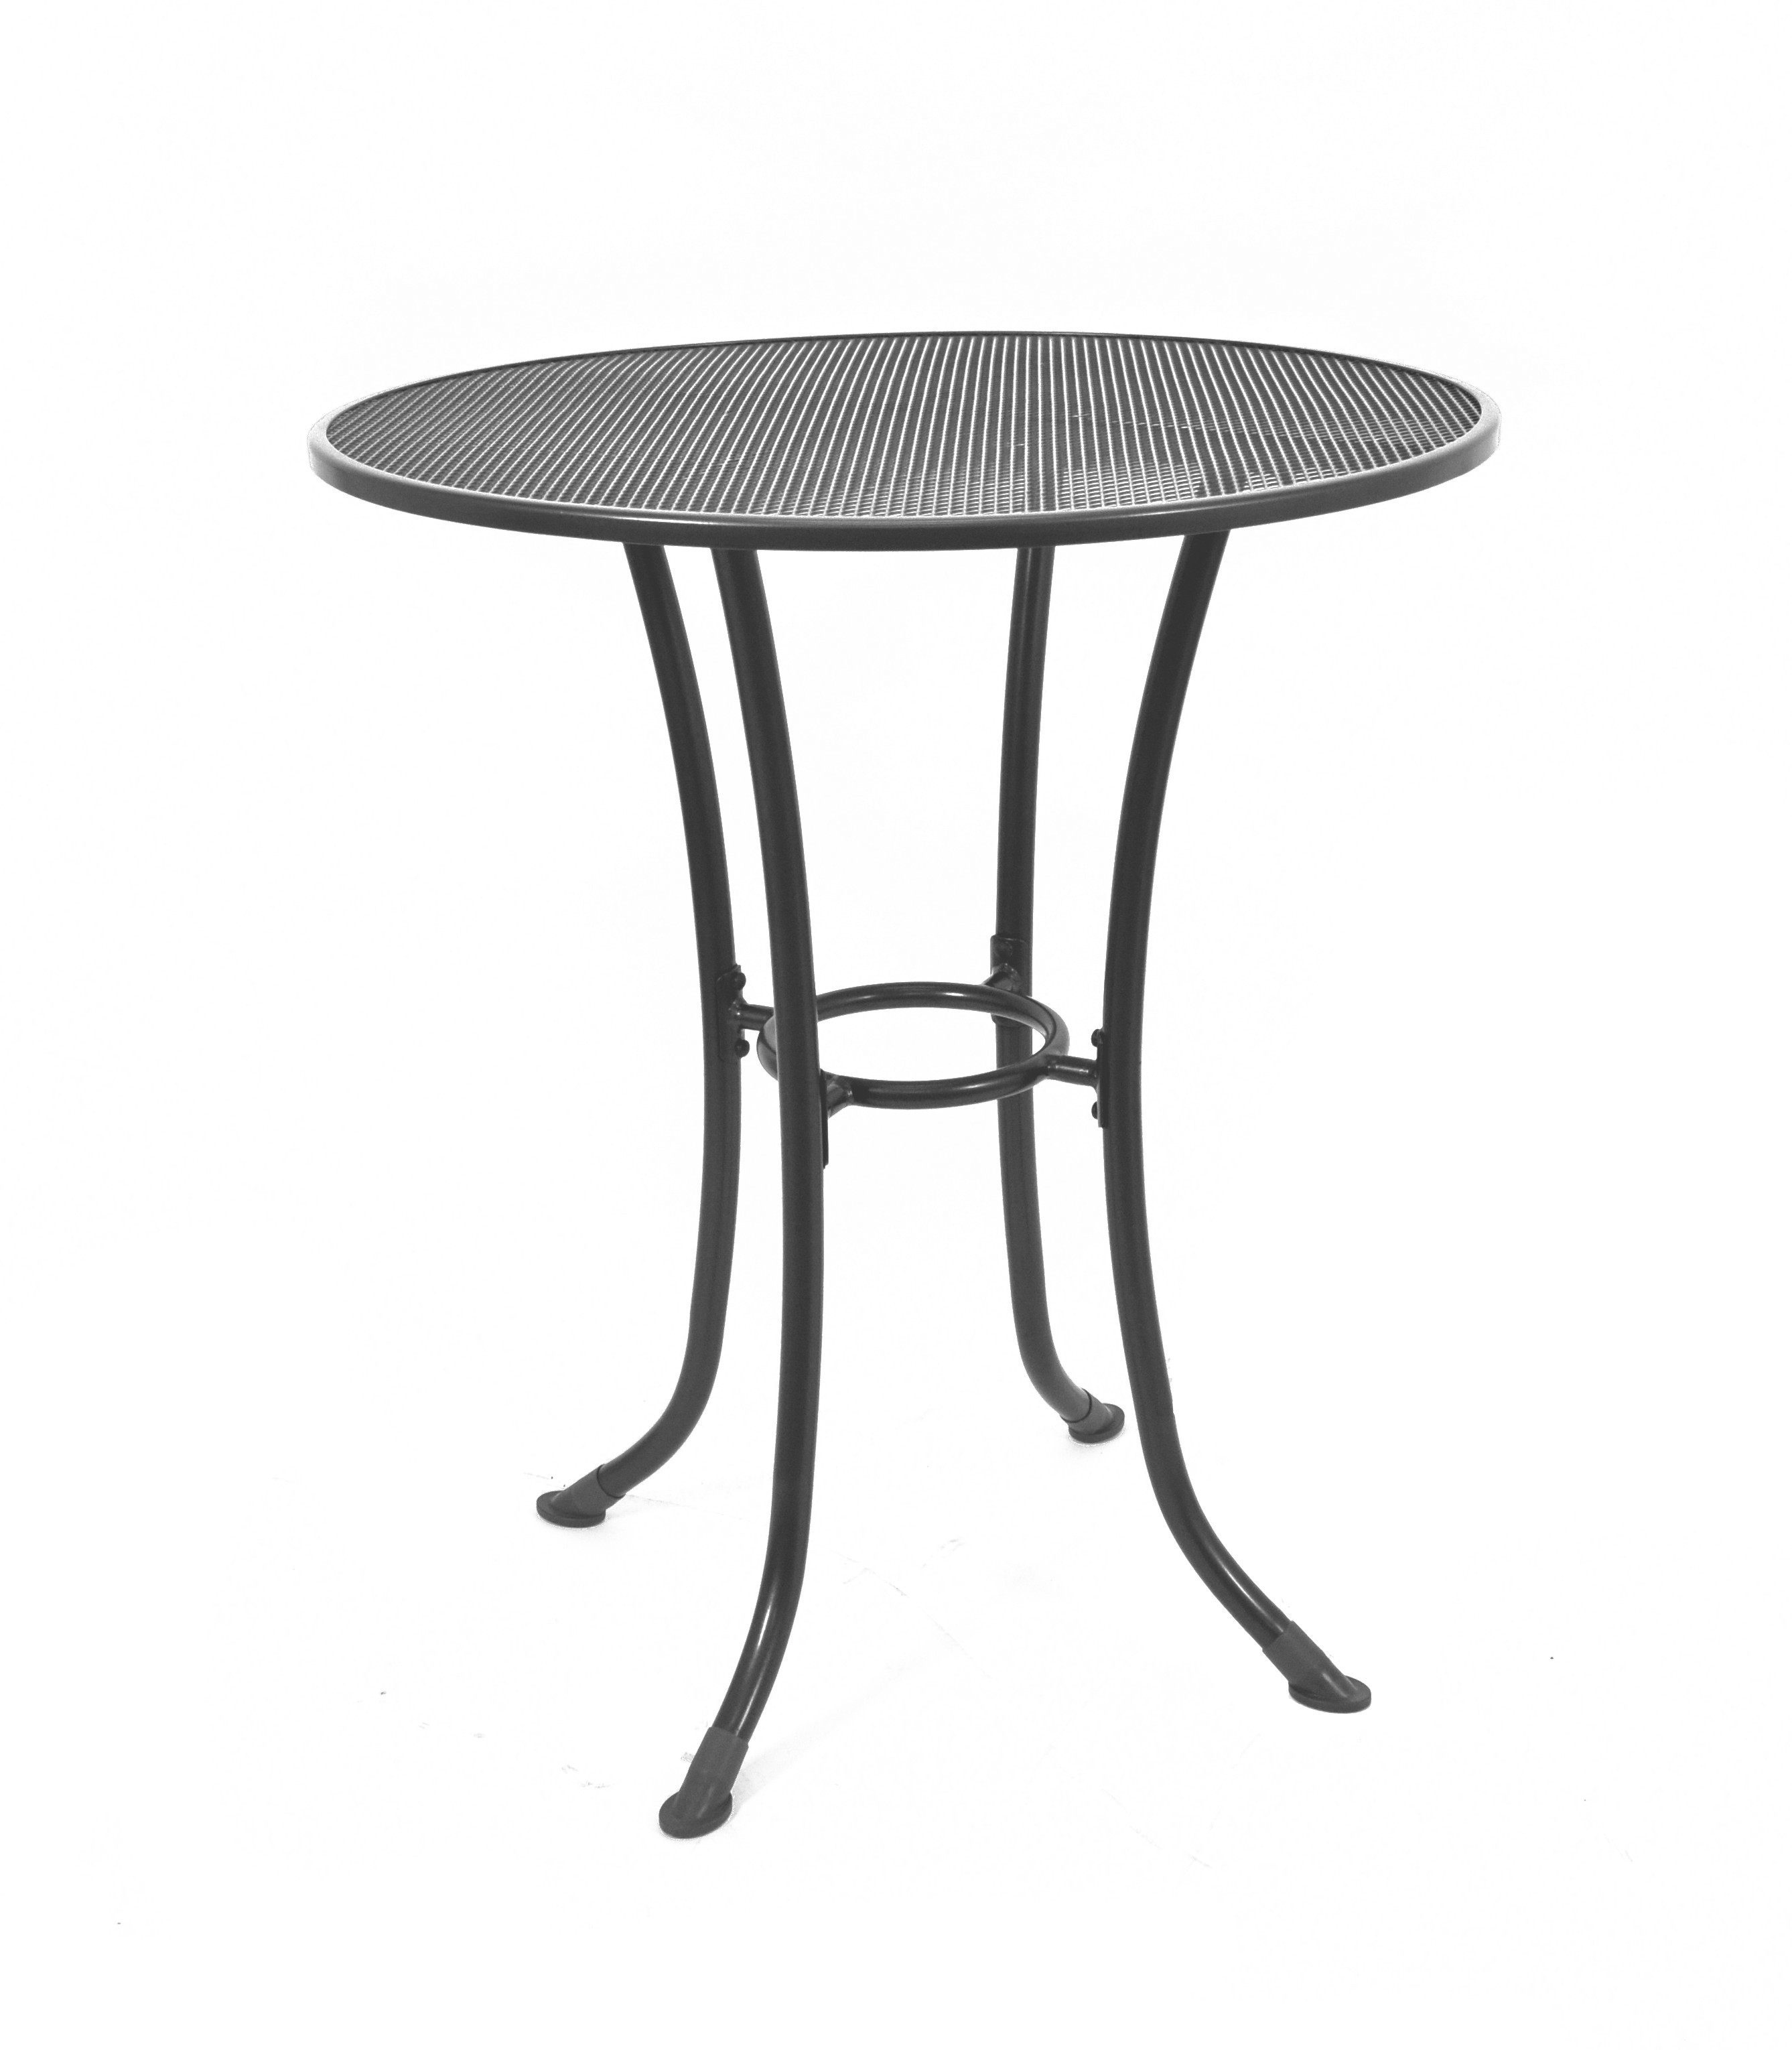 36″ ROUND MESH BAR TABLE
#T3168-0200S
